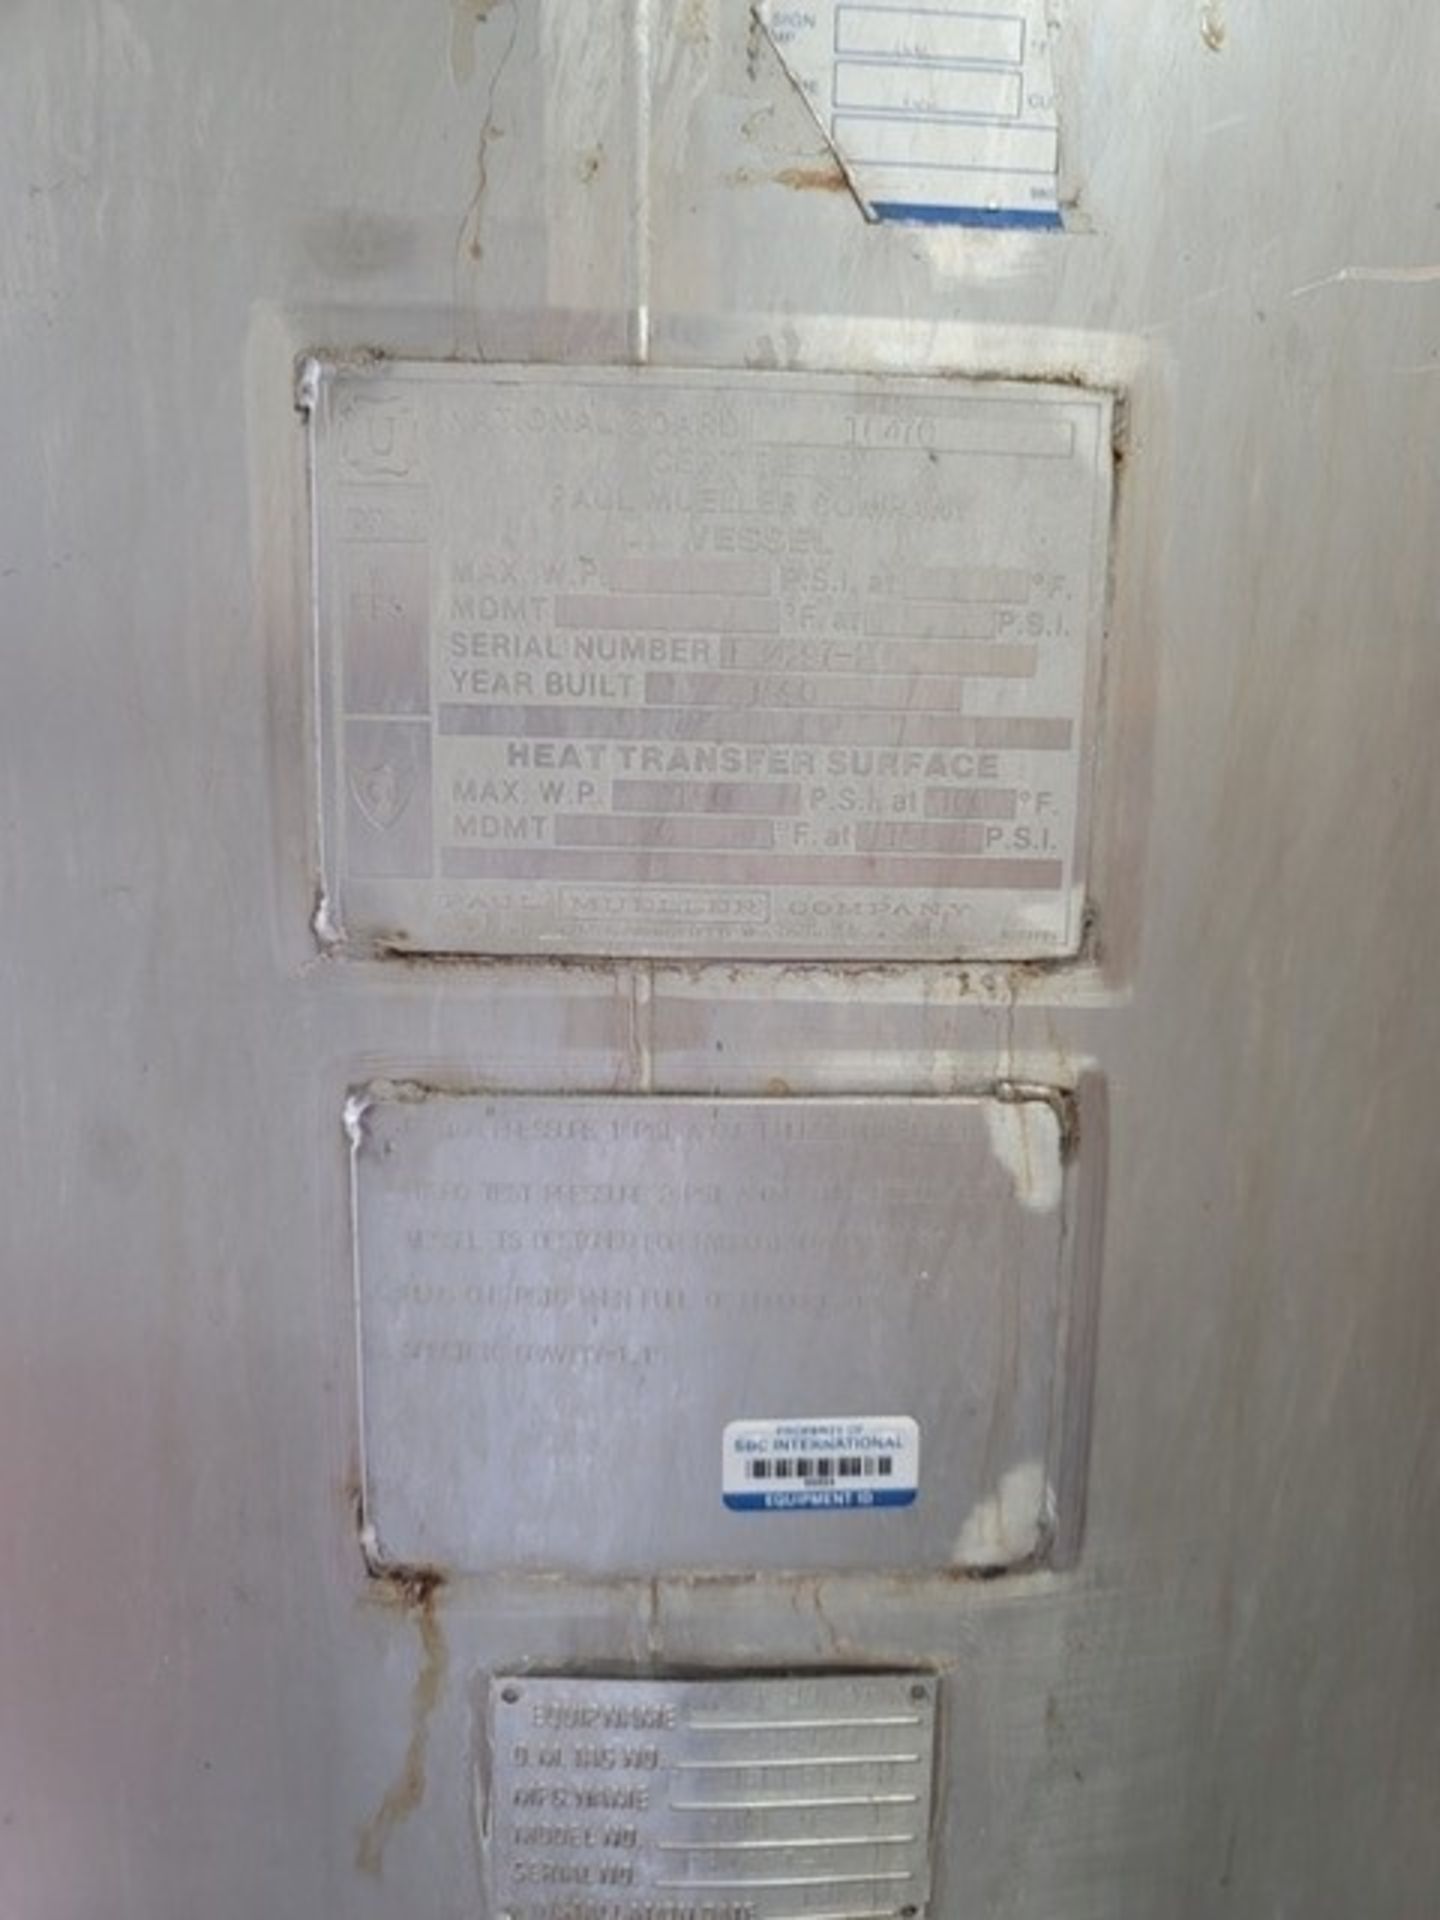 Mueller 1000 Gallon Jacketed S/S Mixing Tank - Last used in Cosmetics -- Sold As Is Where Is. (NOTE: - Image 3 of 6